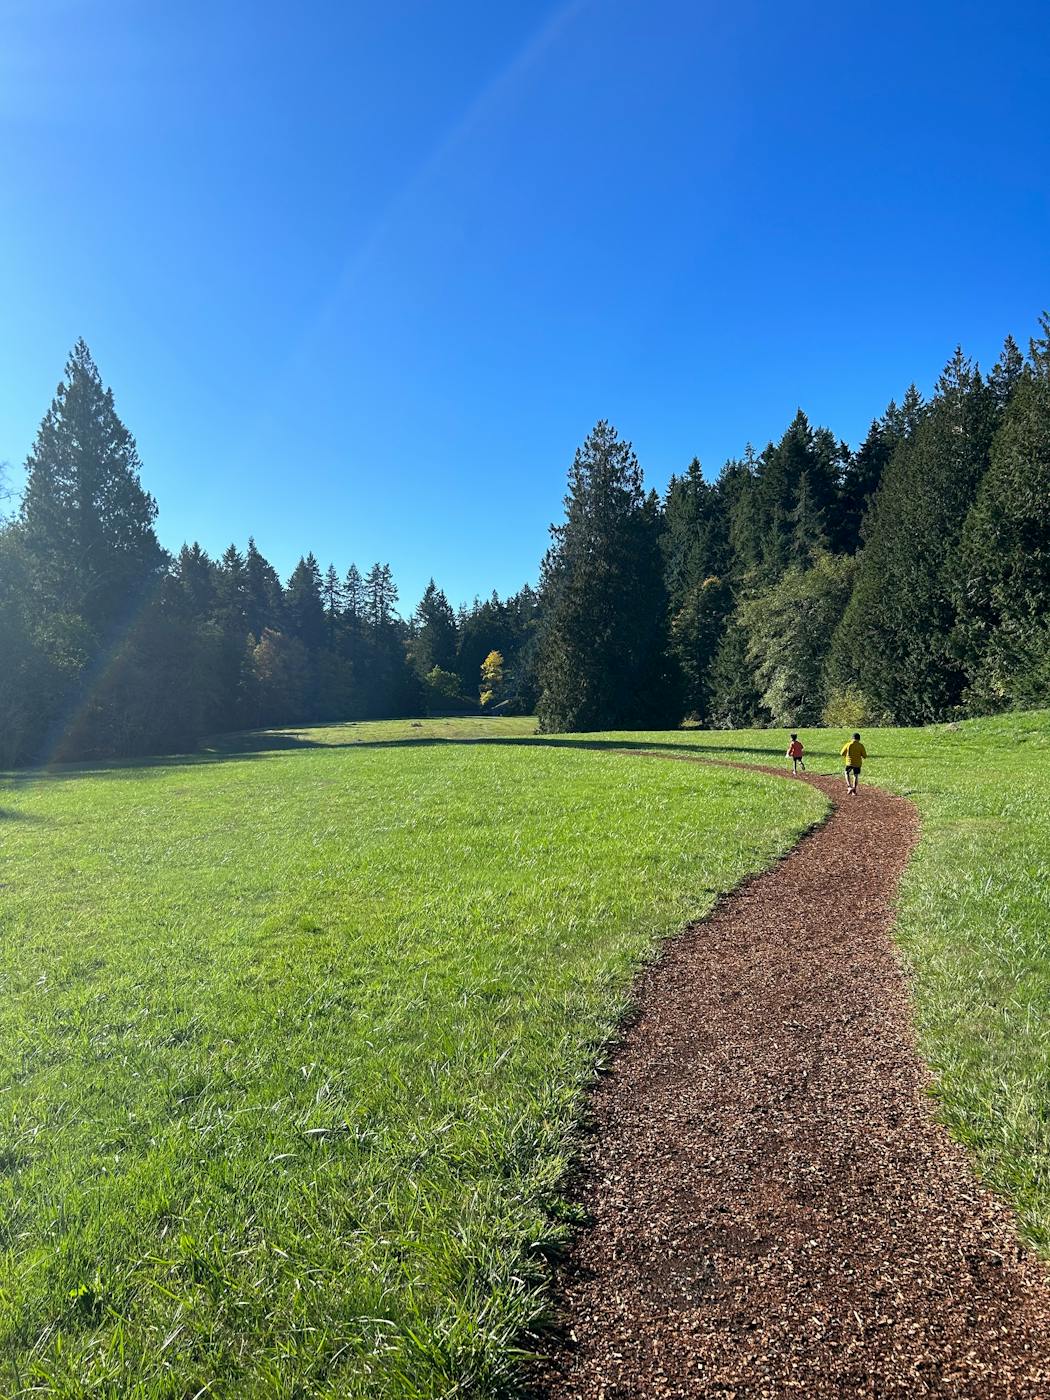 The Bloedel Reserve, a 140-acre nature area of forest, gardens and meadows, feels more than a short ferry trip away from the hustle and bustle of Seattle. 